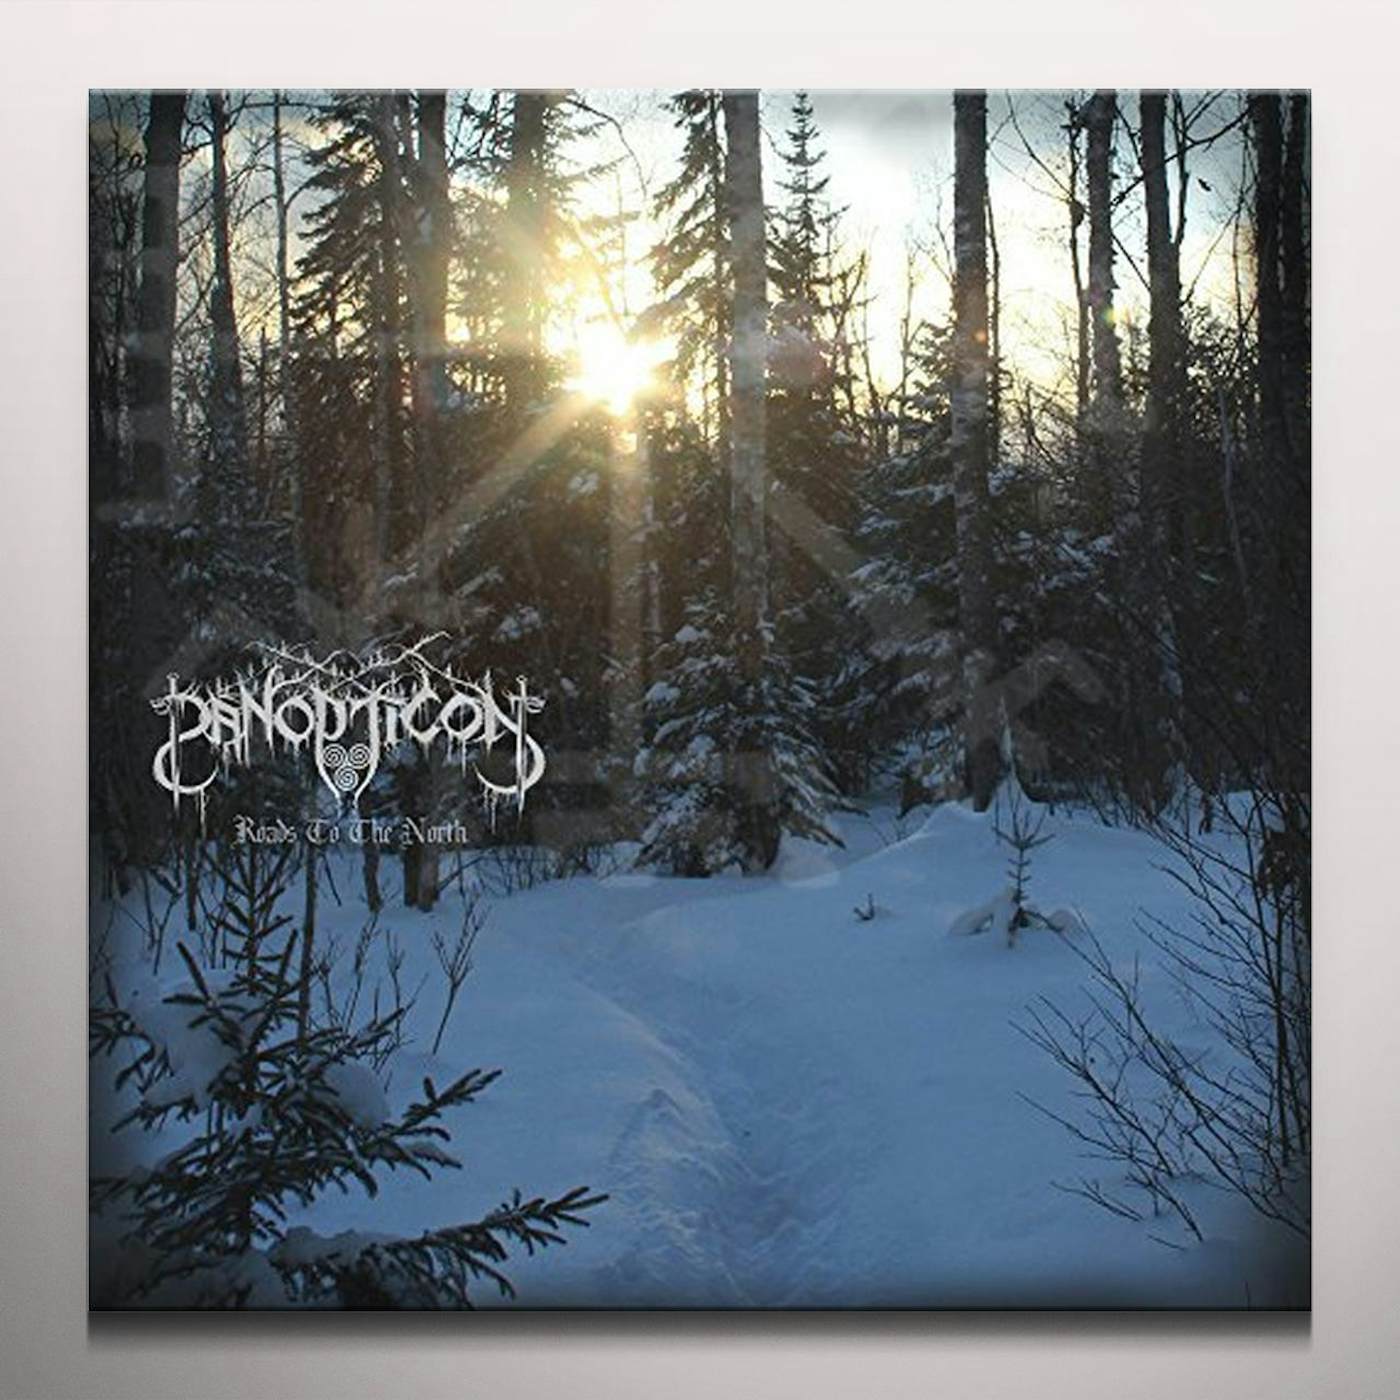 Panopticon ROADS TO THE NORTH Vinyl Record - Blue Vinyl, Gatefold Sleeve, Limited Edition